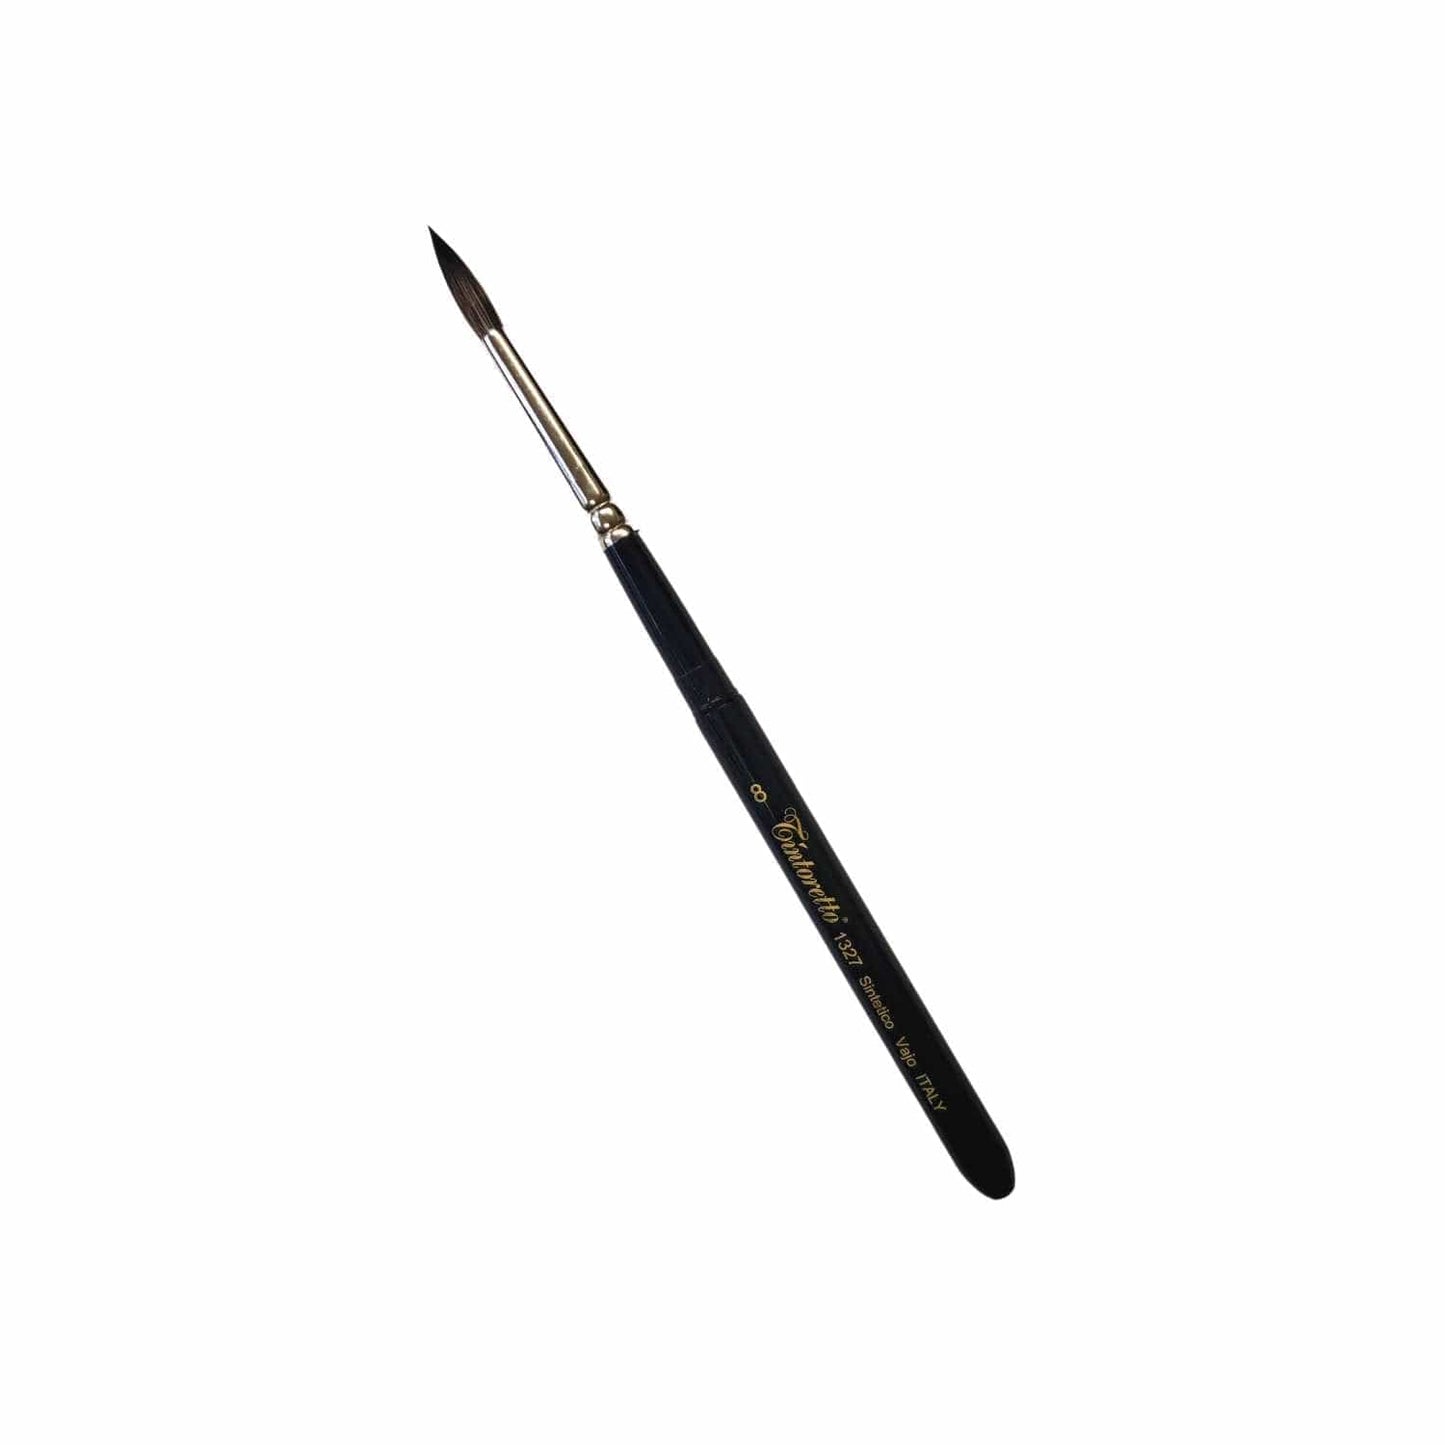 Tintoretto Pocket Brush Tintoretto - Pocket Brush - Synthetic Squirrel - Series 1327 - Round - Size 8